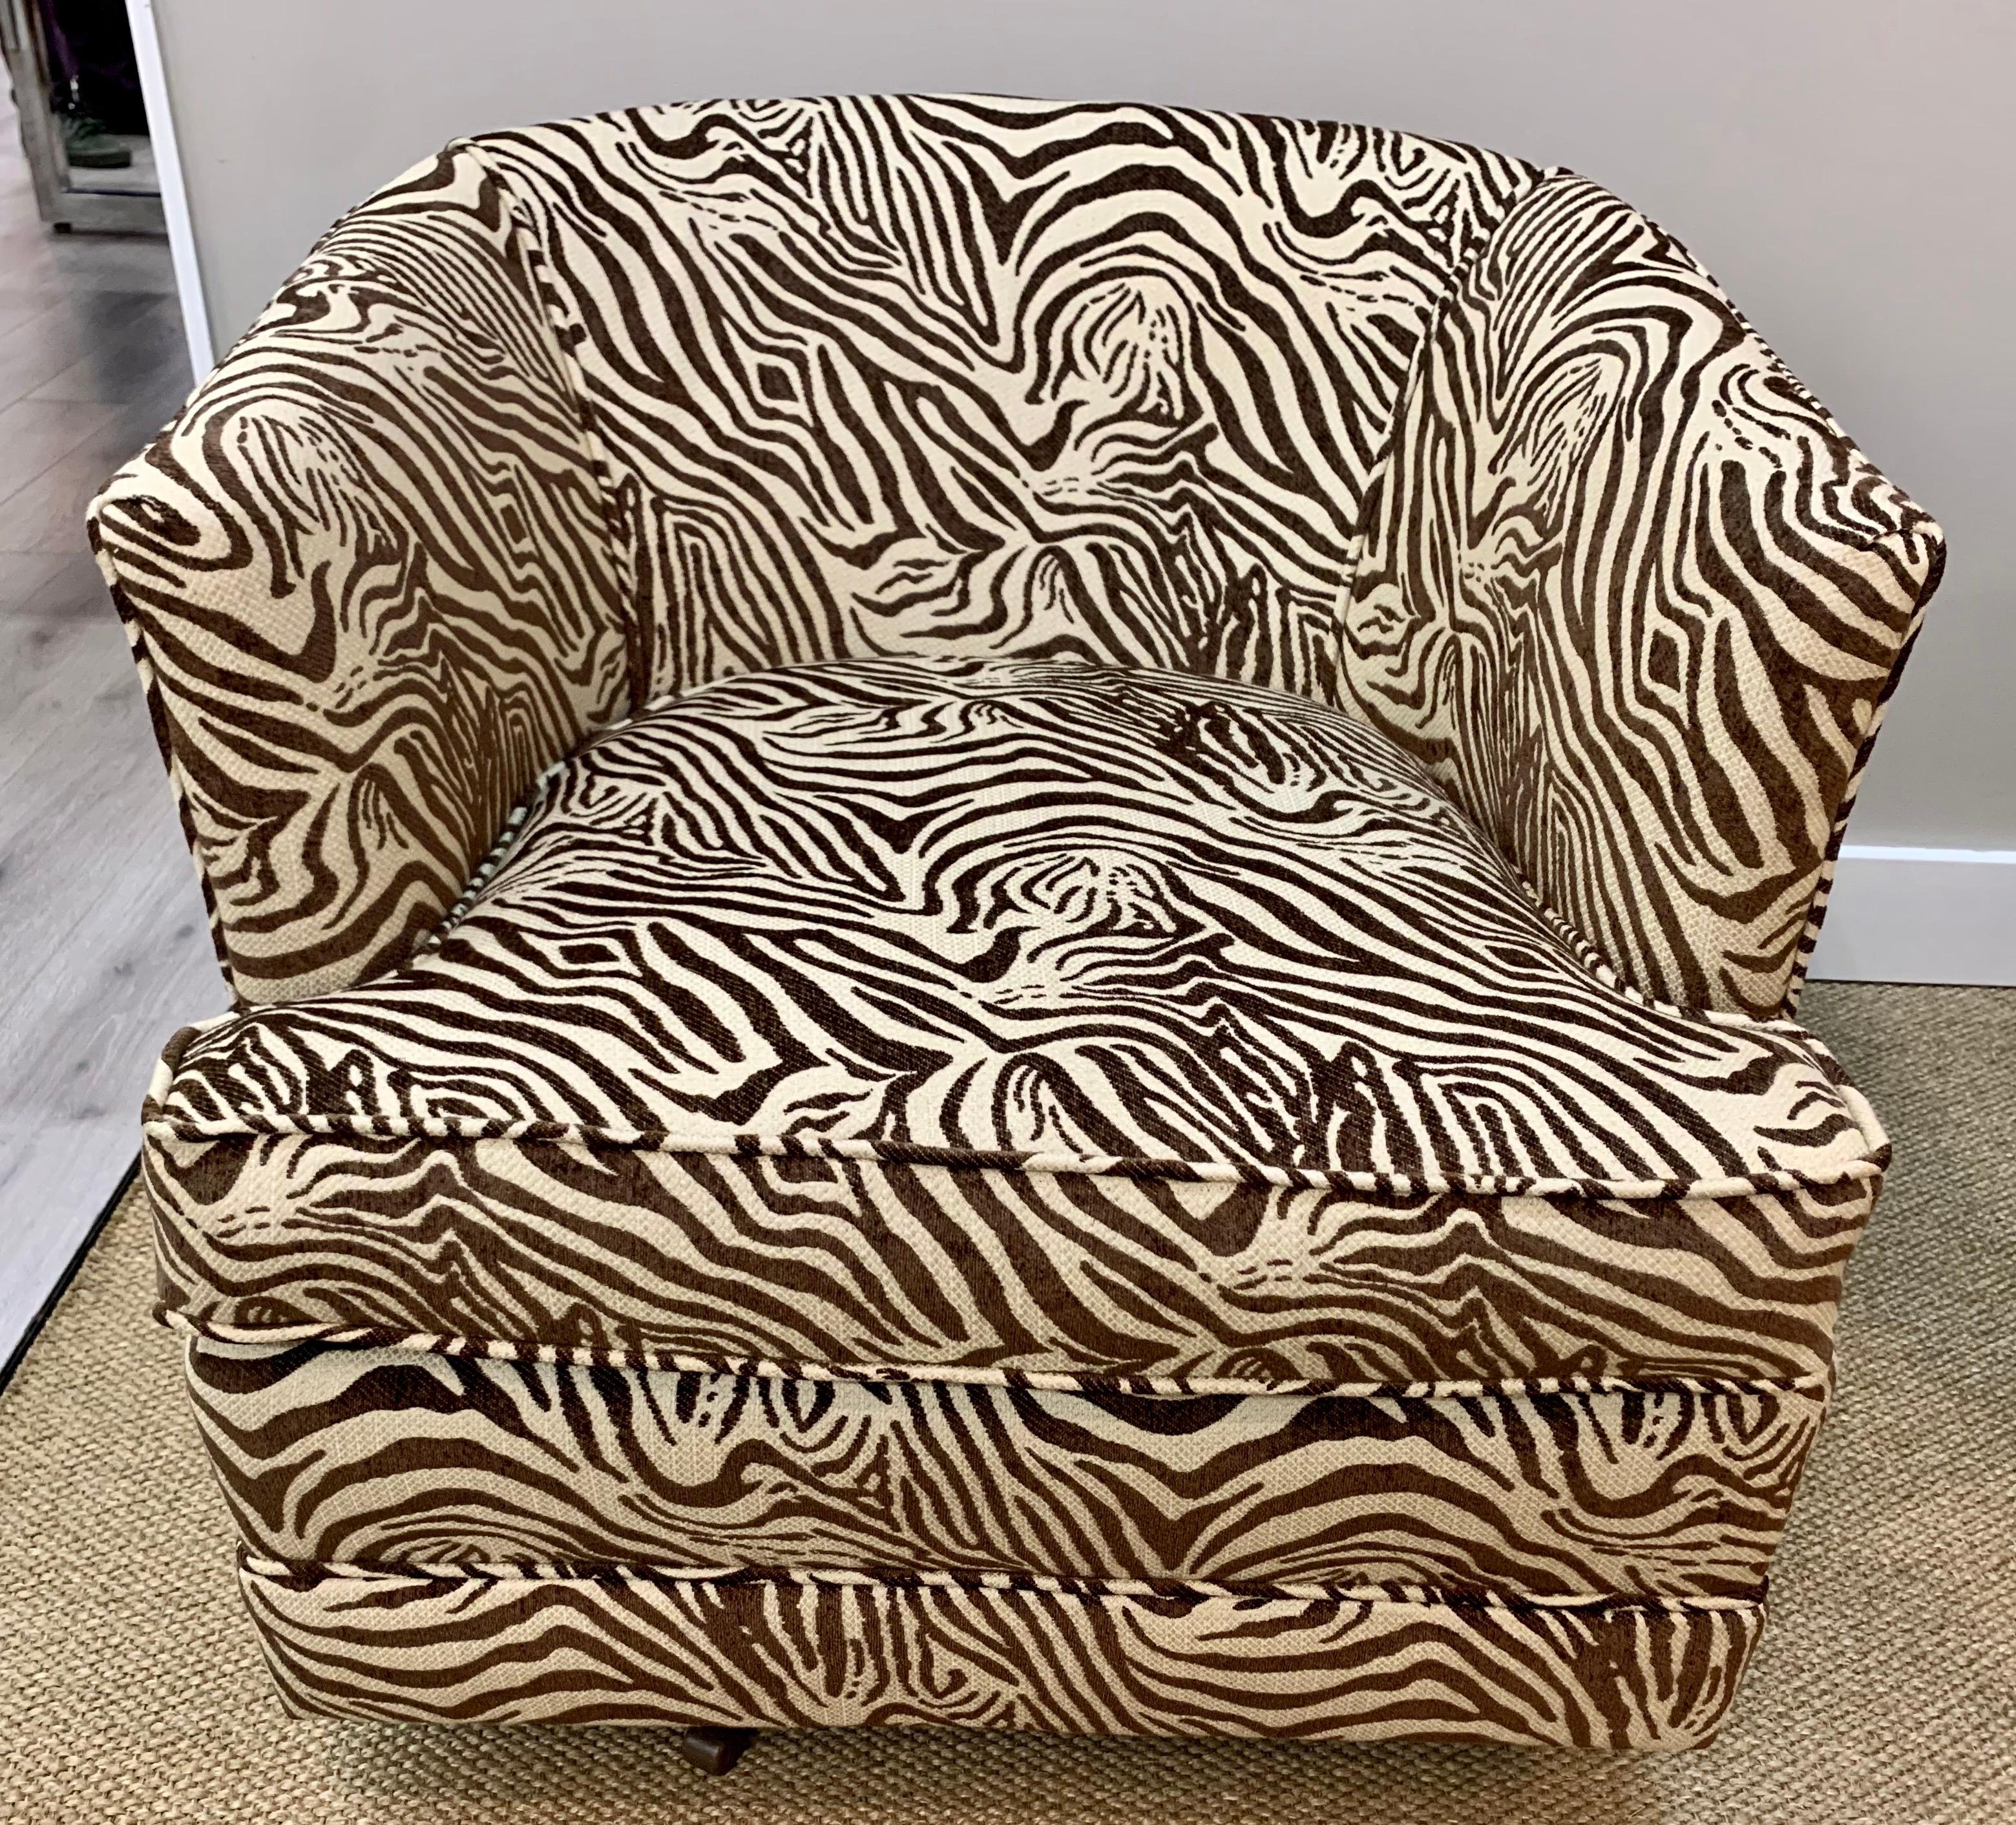 Fabric Mid Century Newly Upholstered Swivel Chairs in Zebra Print